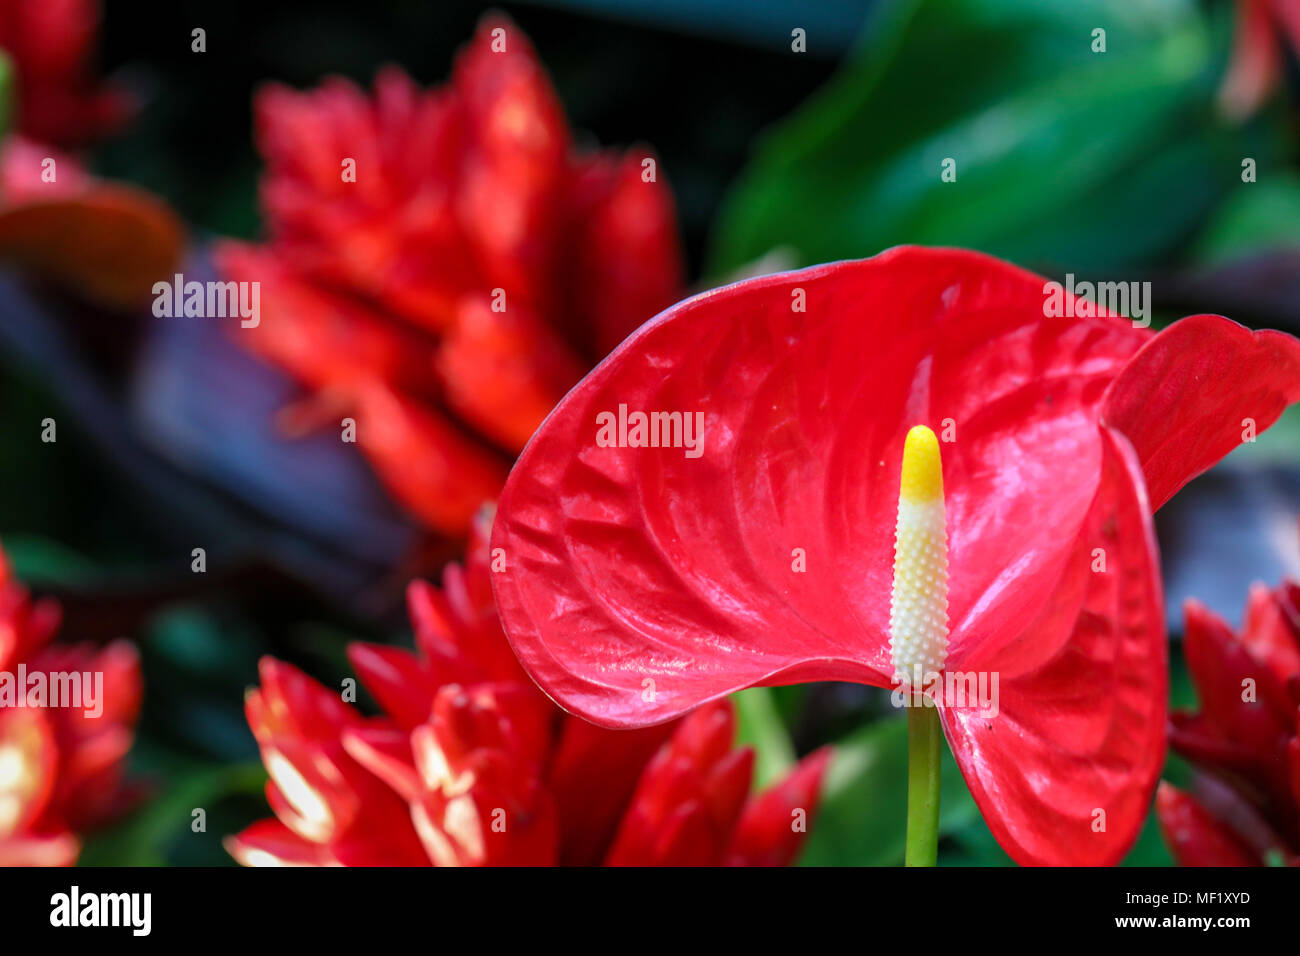 Colorful close up images of flower. Stock Photo